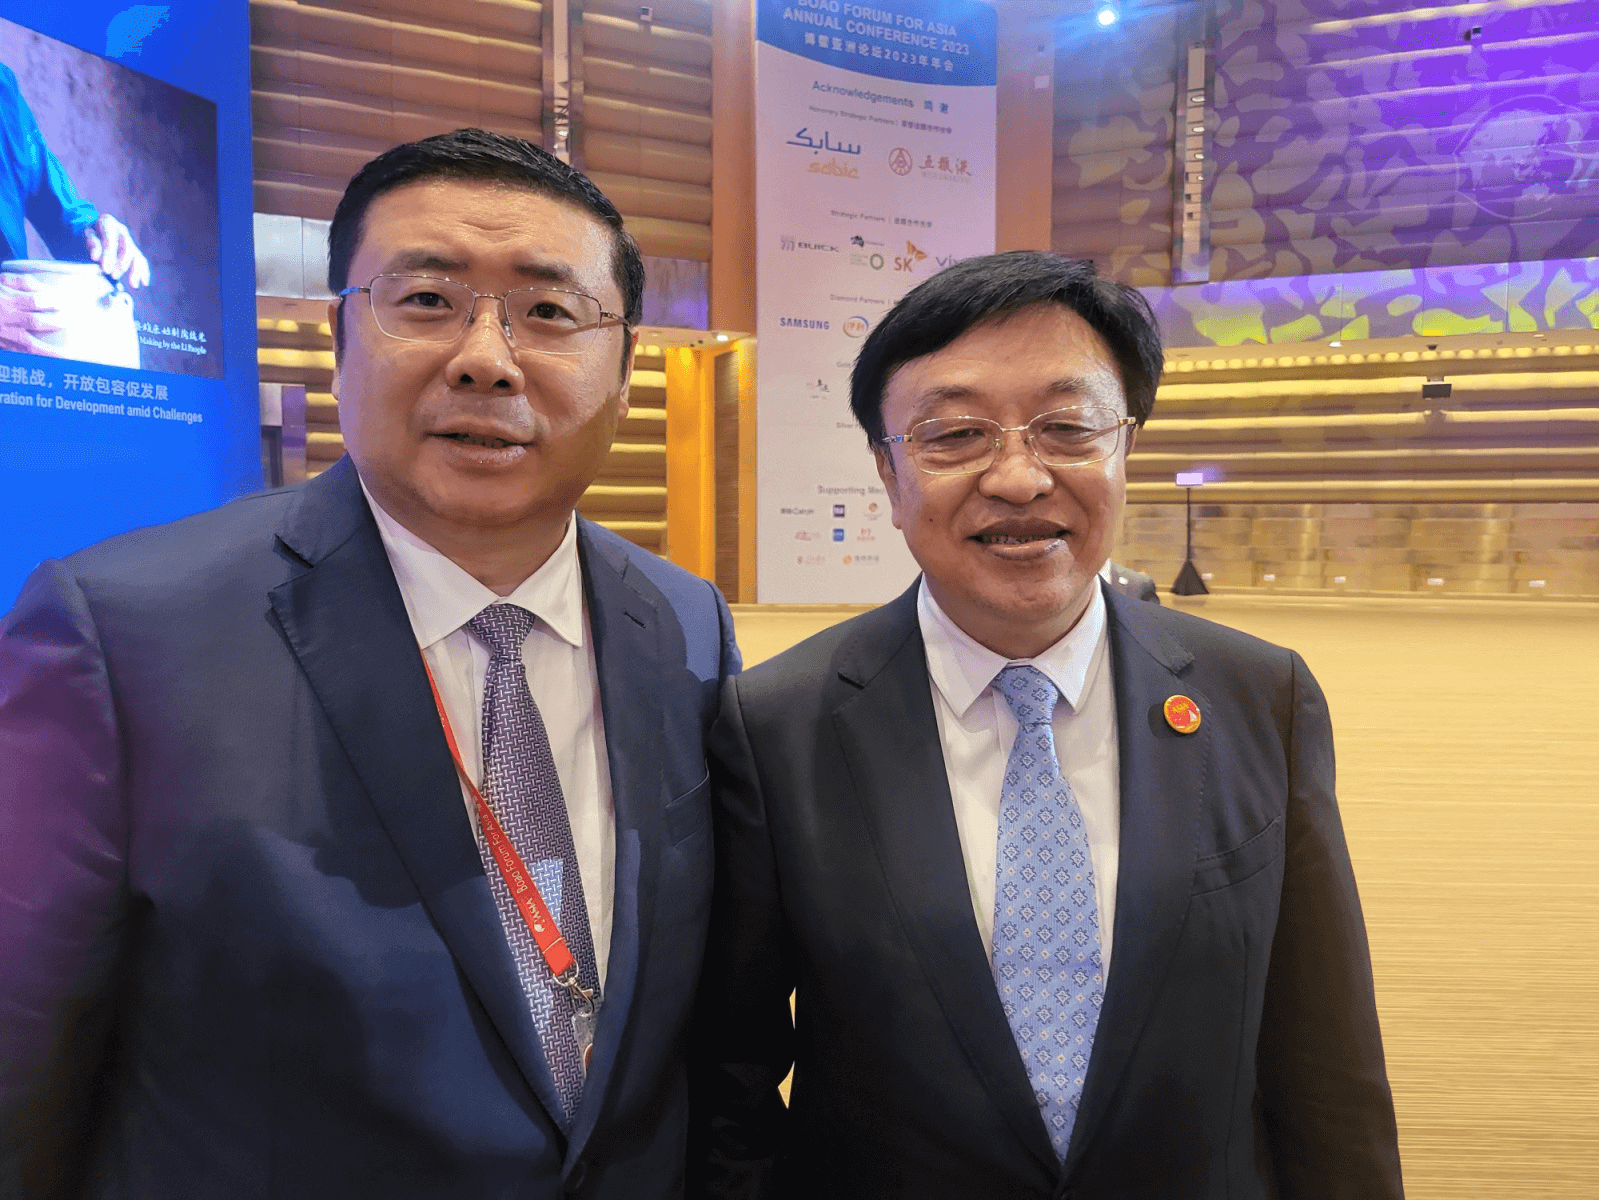 Chairman Li Yong took a photo with Feng Fei, the Secretary of the CPC Hainan Provincial Committeey of the CPC Hainan Provincial Committee